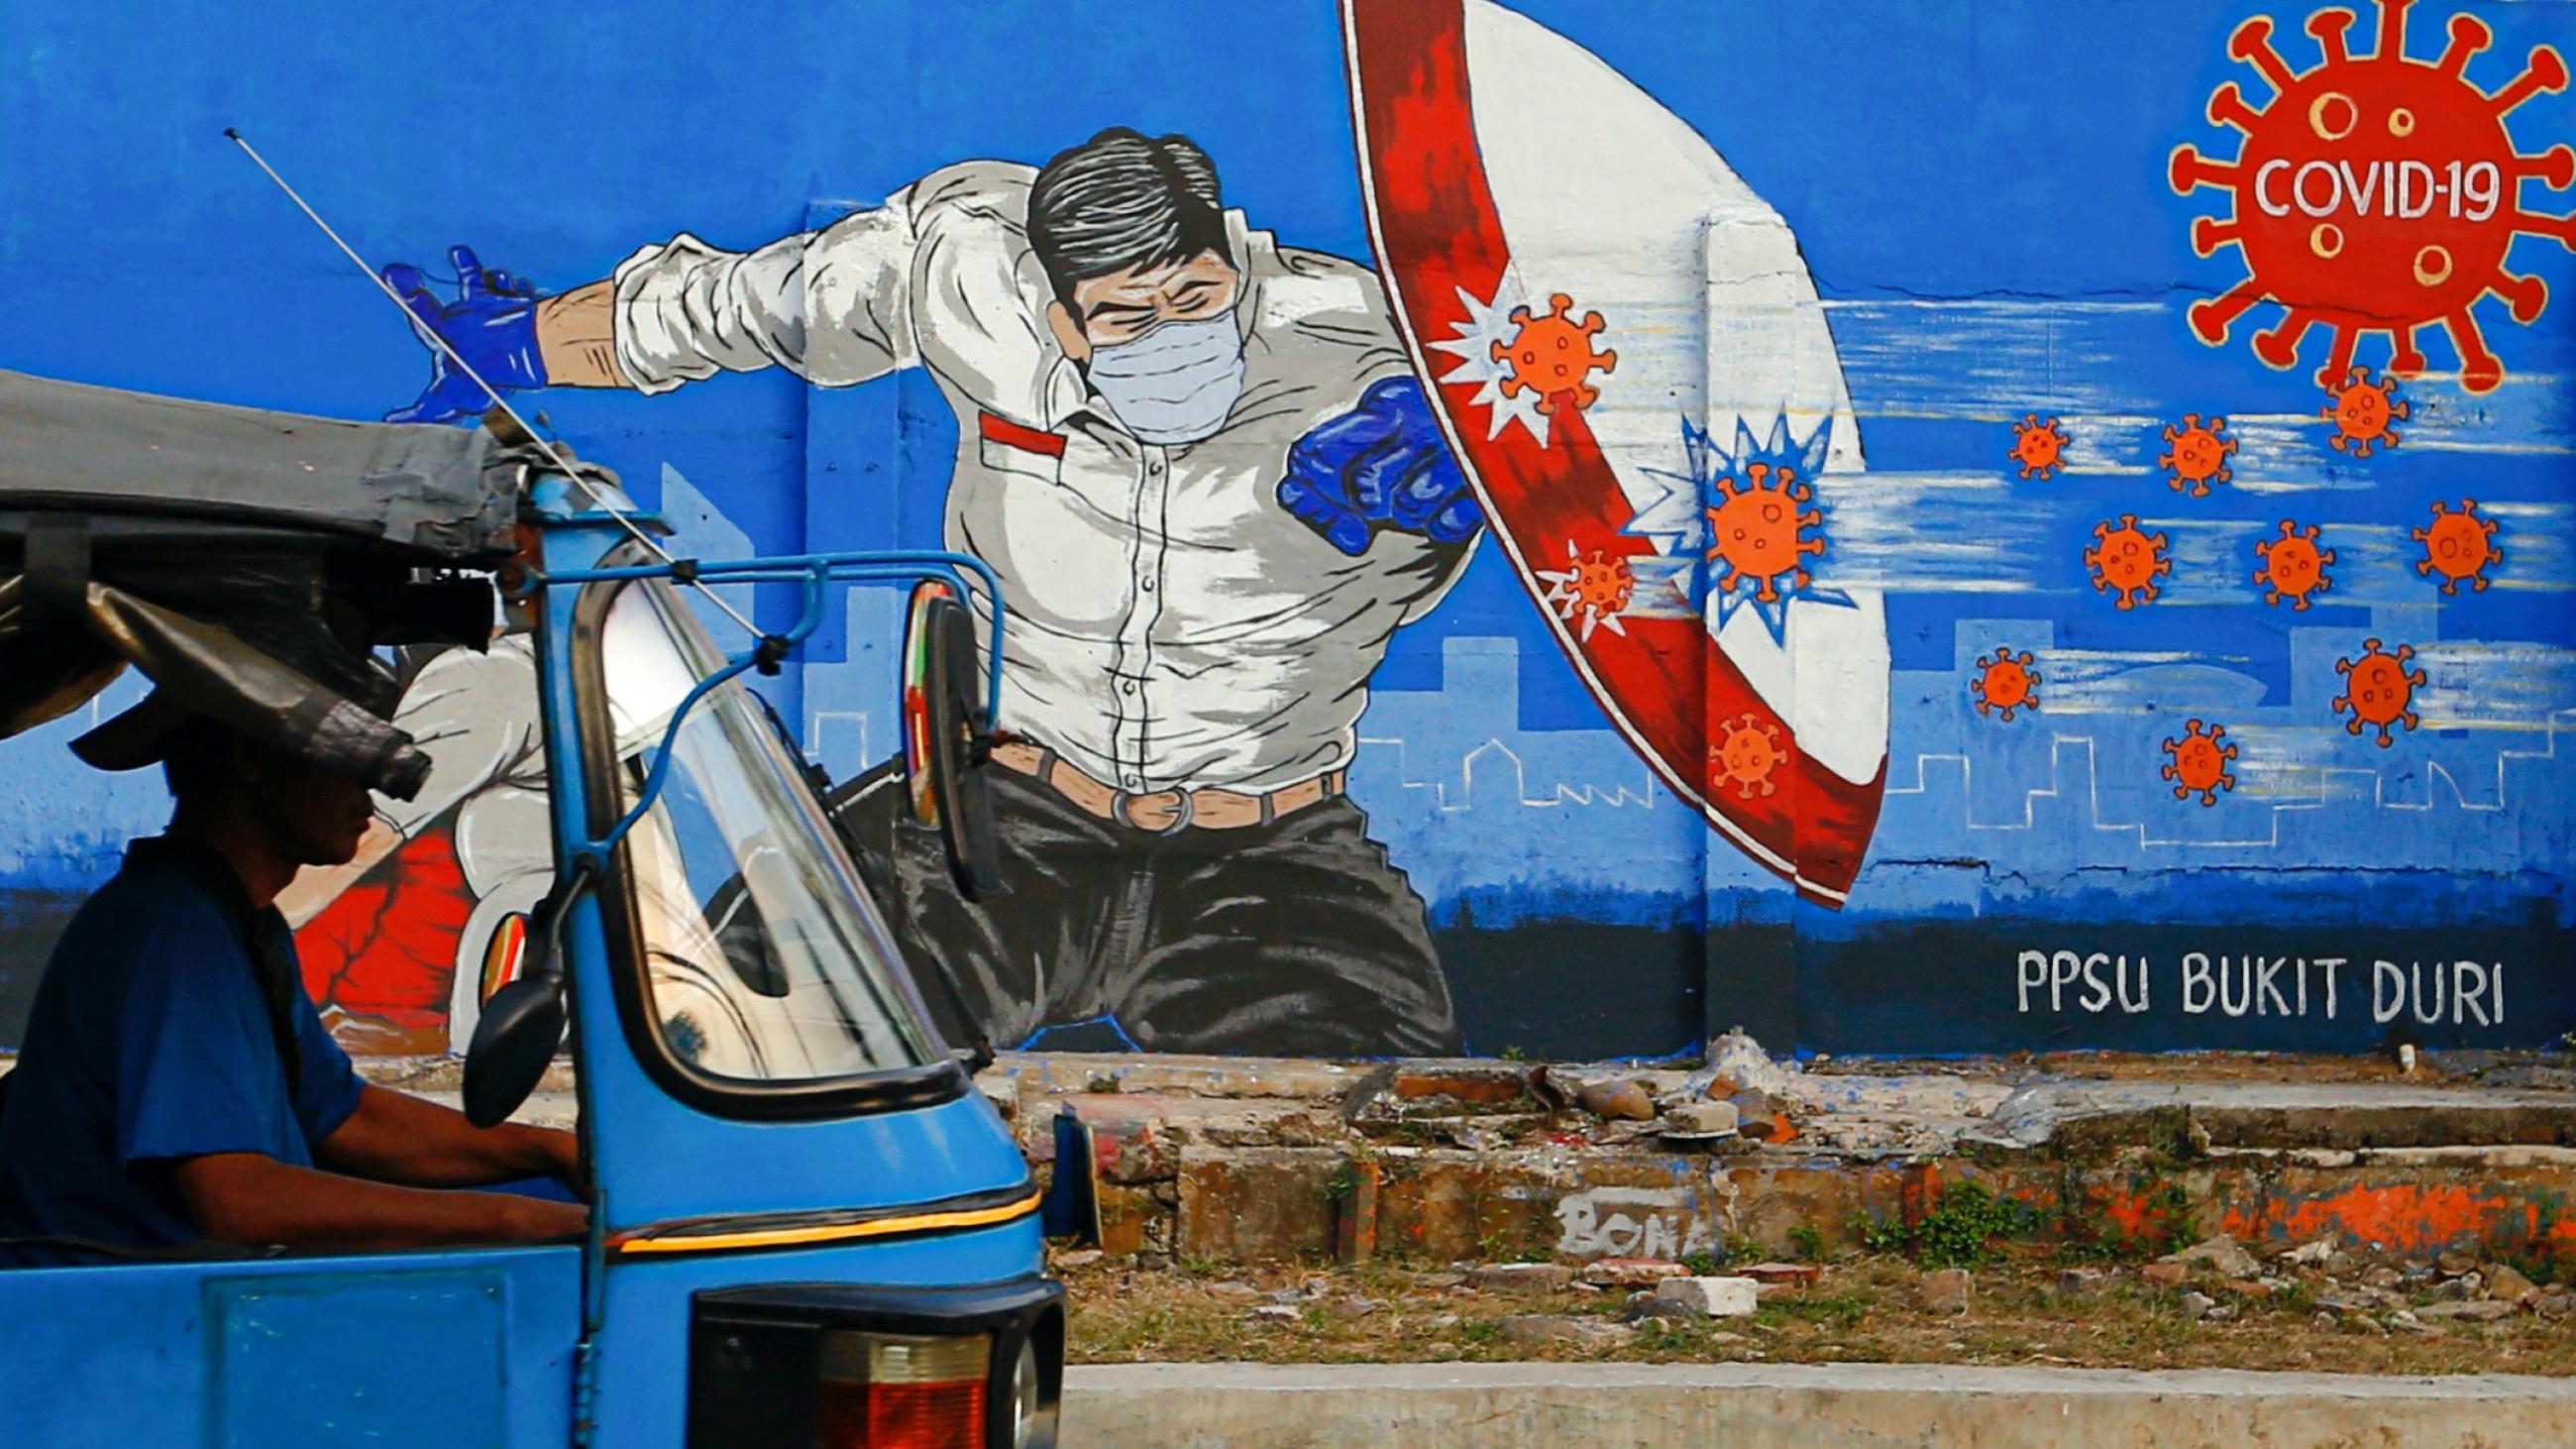 A rickshaw taxi passes a mural promoting COVID awareness in Jakarta, Indonesia, on August 31, 2020.